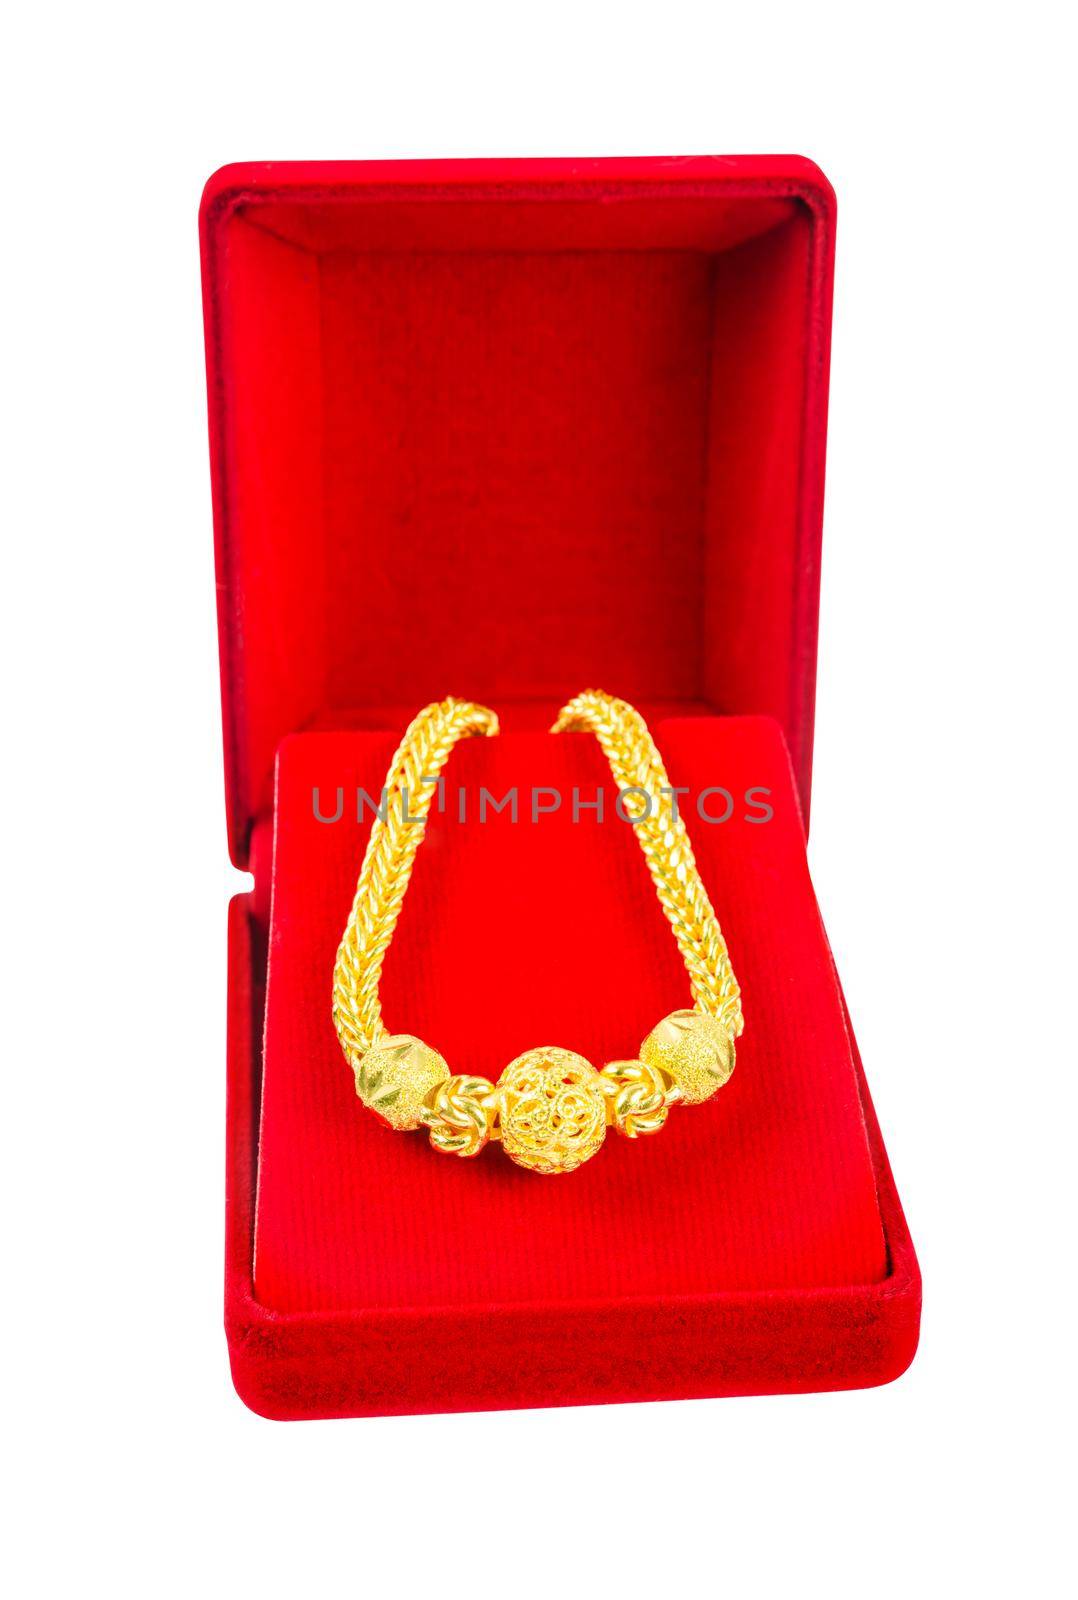 Gold Bracelet in red velvet box isolated on white background, Save clipping path. by Gamjai